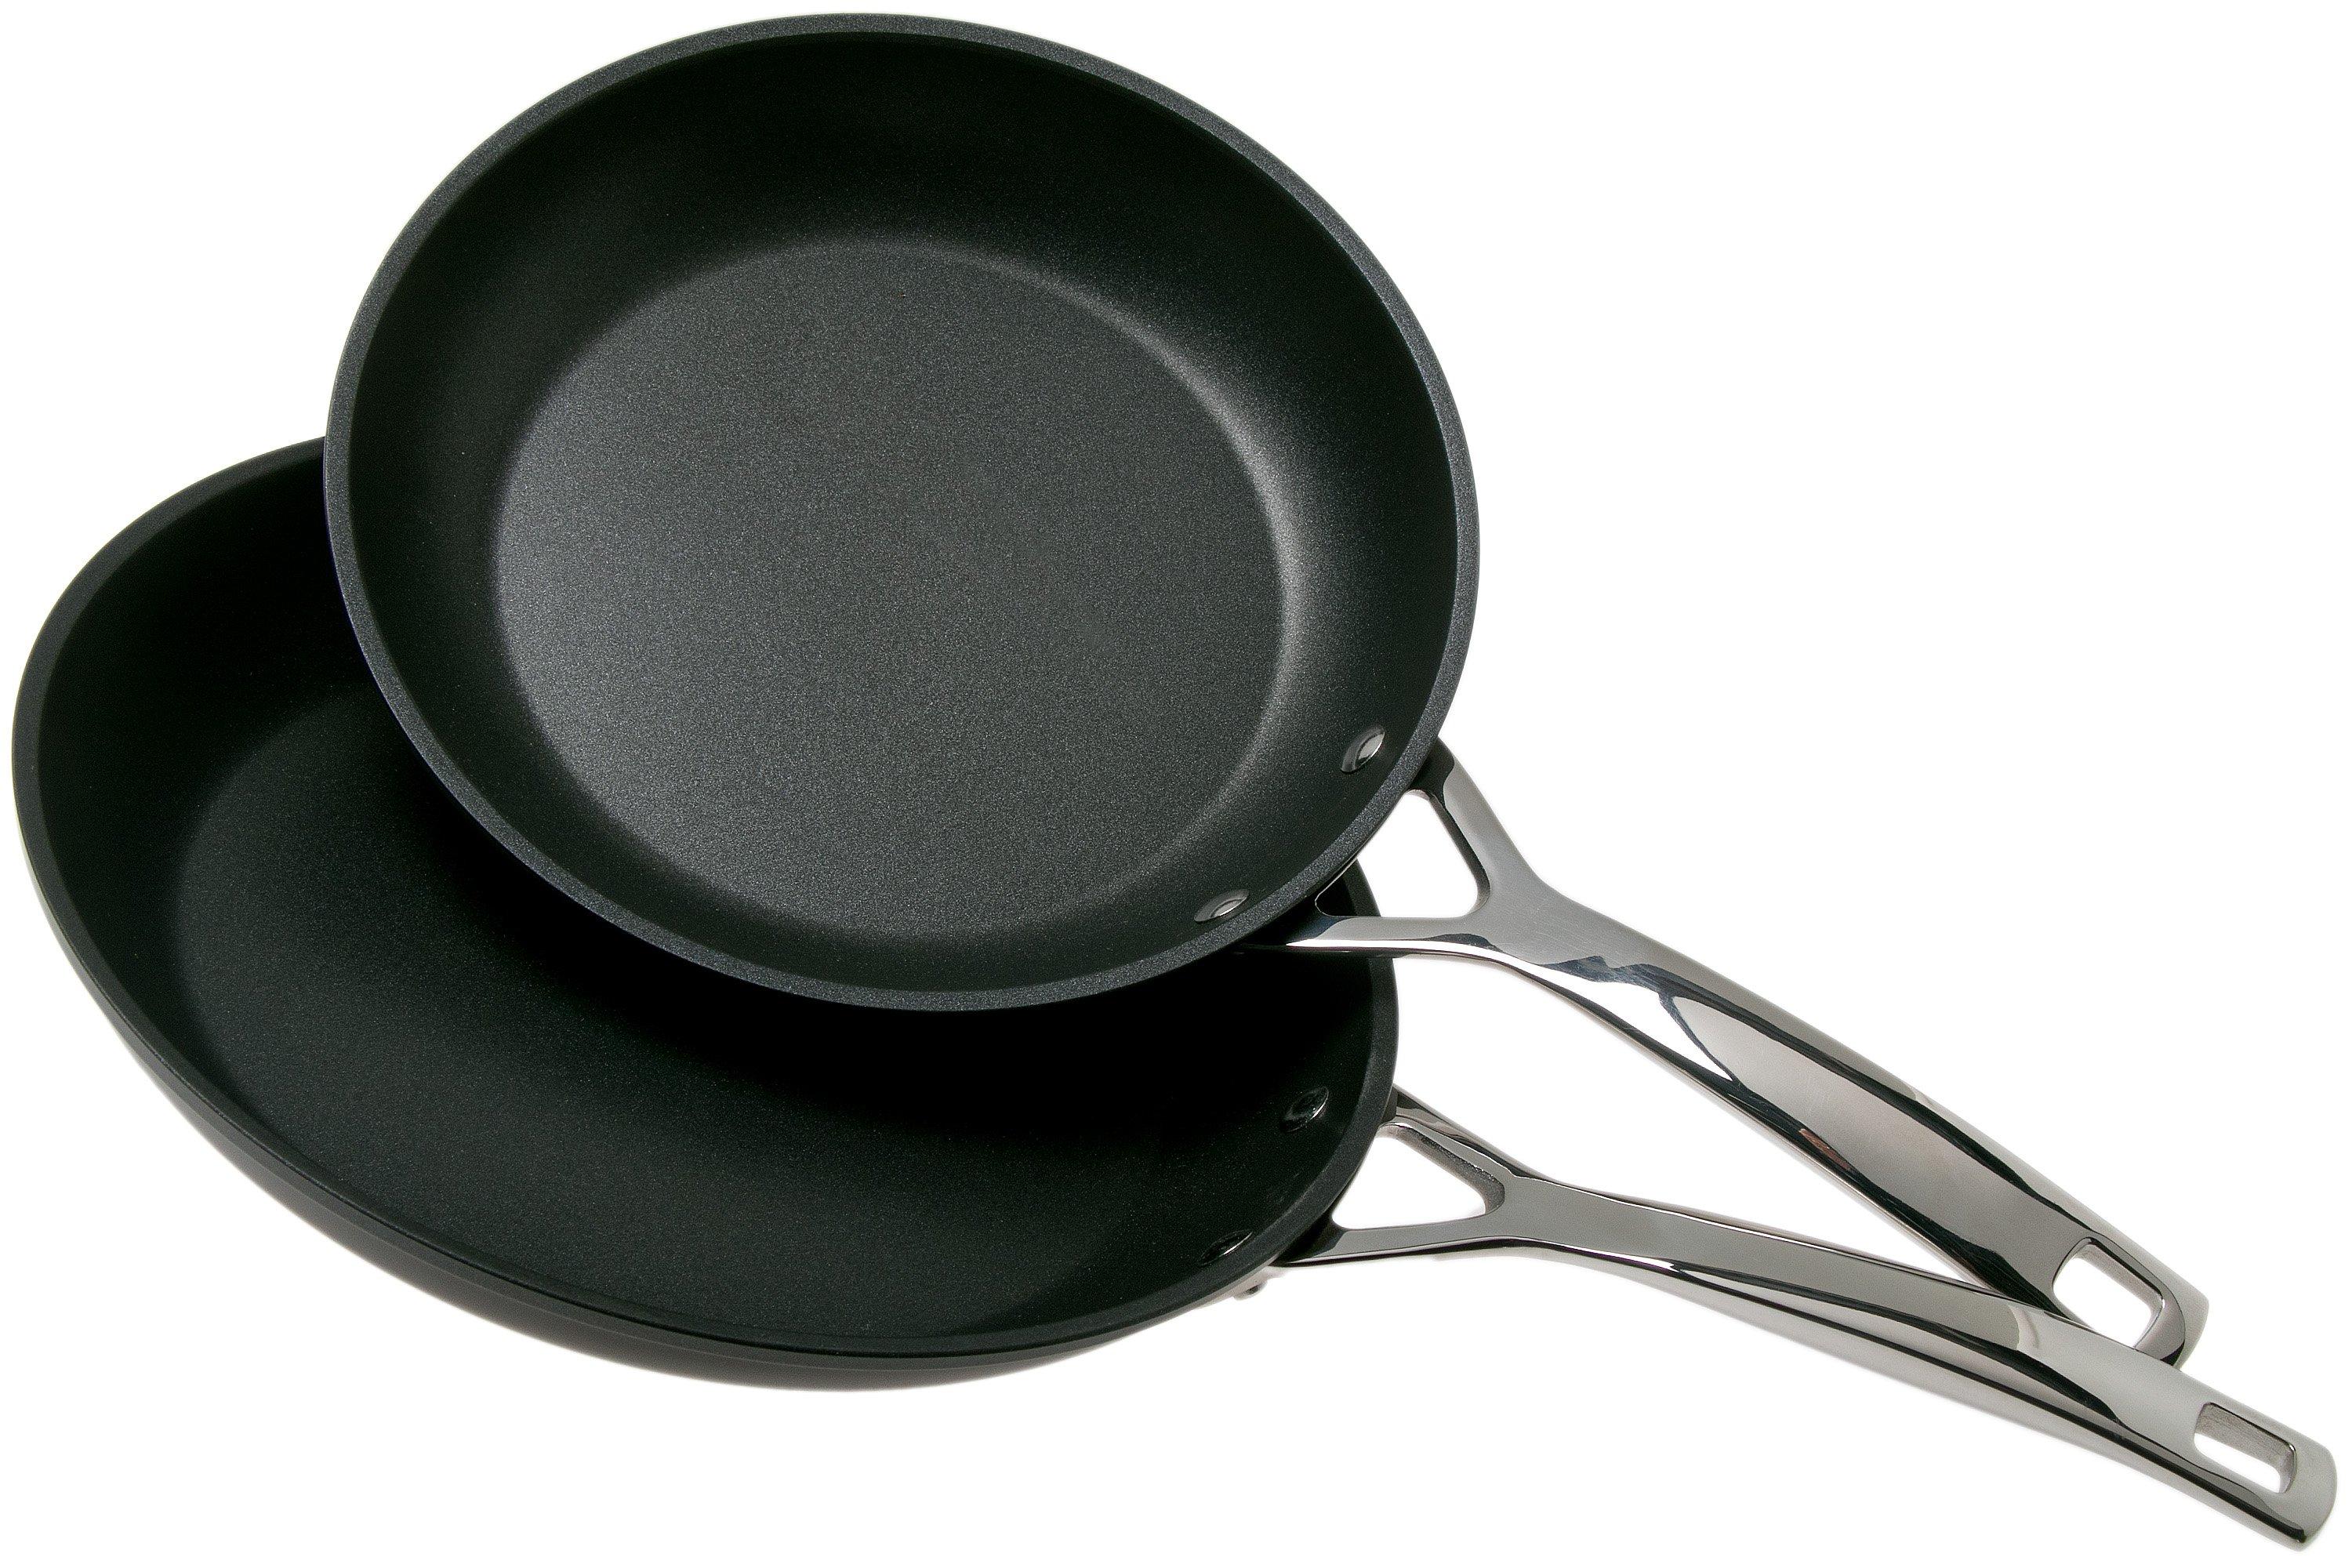 Le Creuset cm and 28 cm frying pan set | Advantageously shopping at